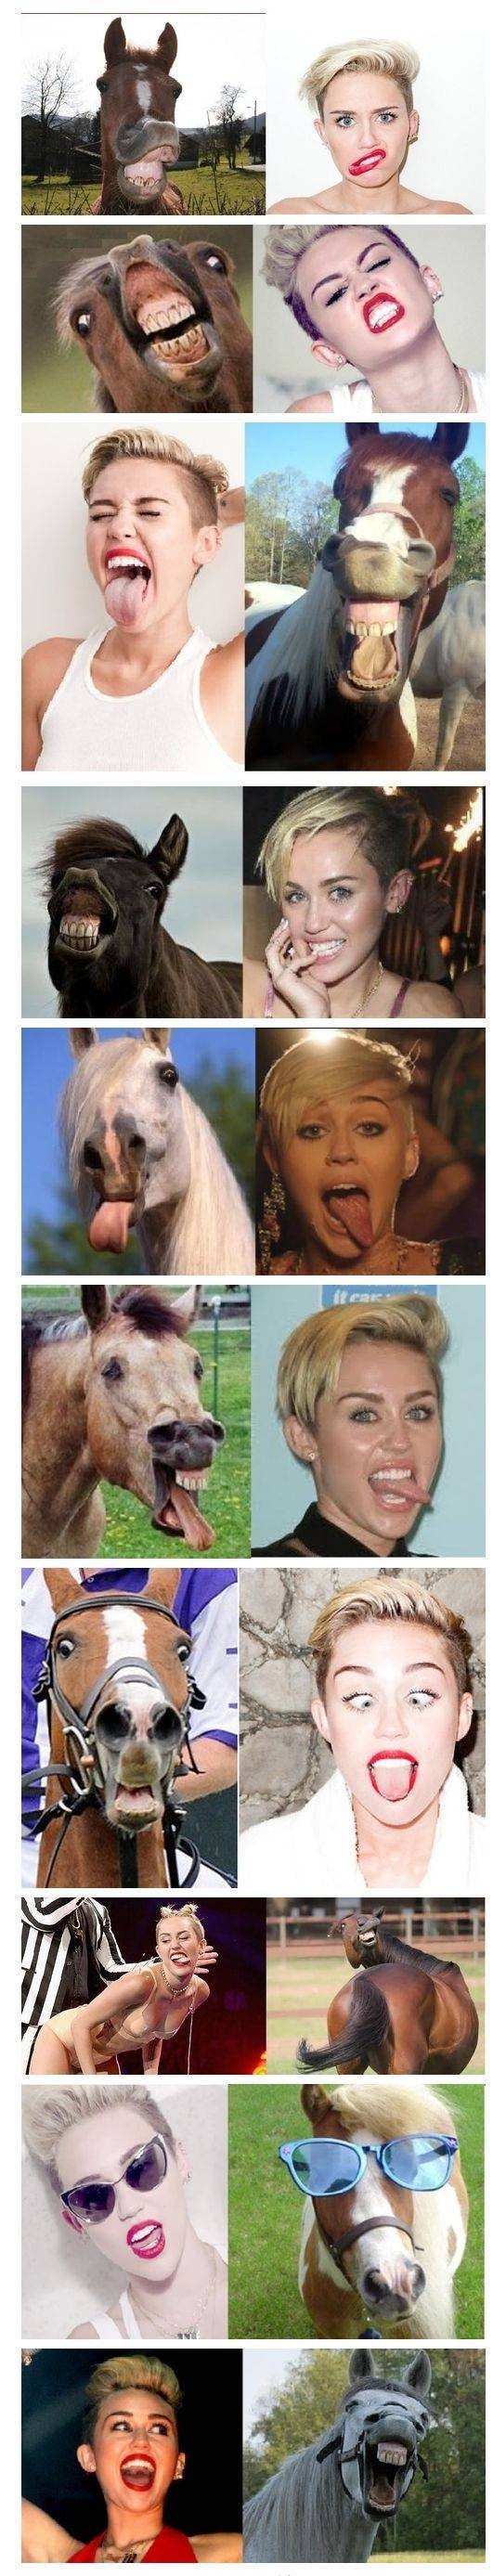 Miley's horse.